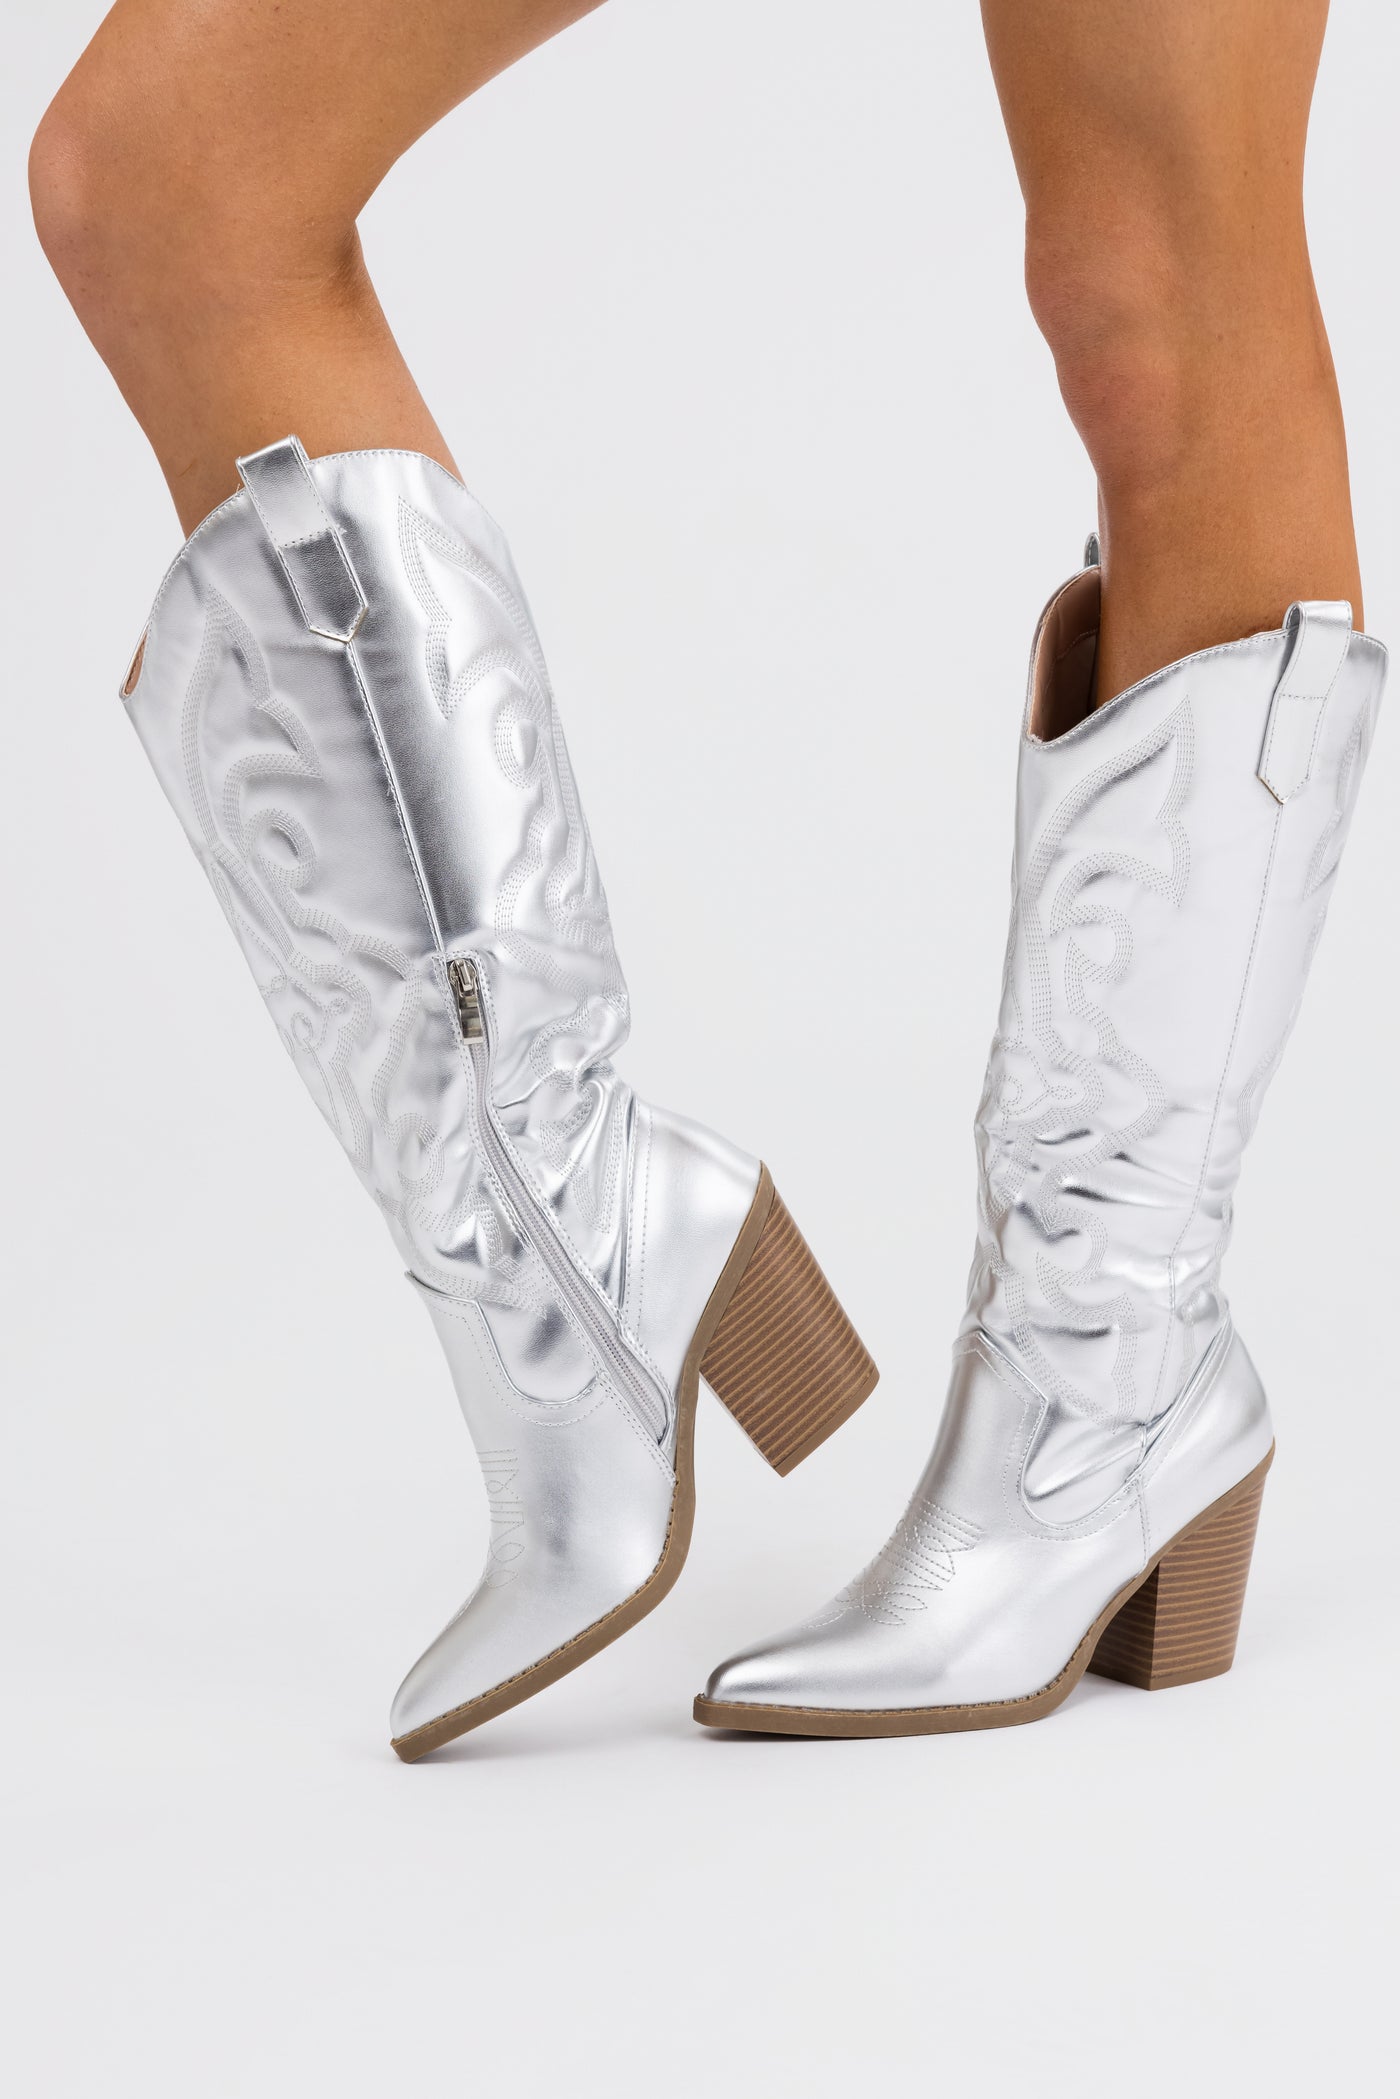 Silver Faux Leather Metallic Western Boots